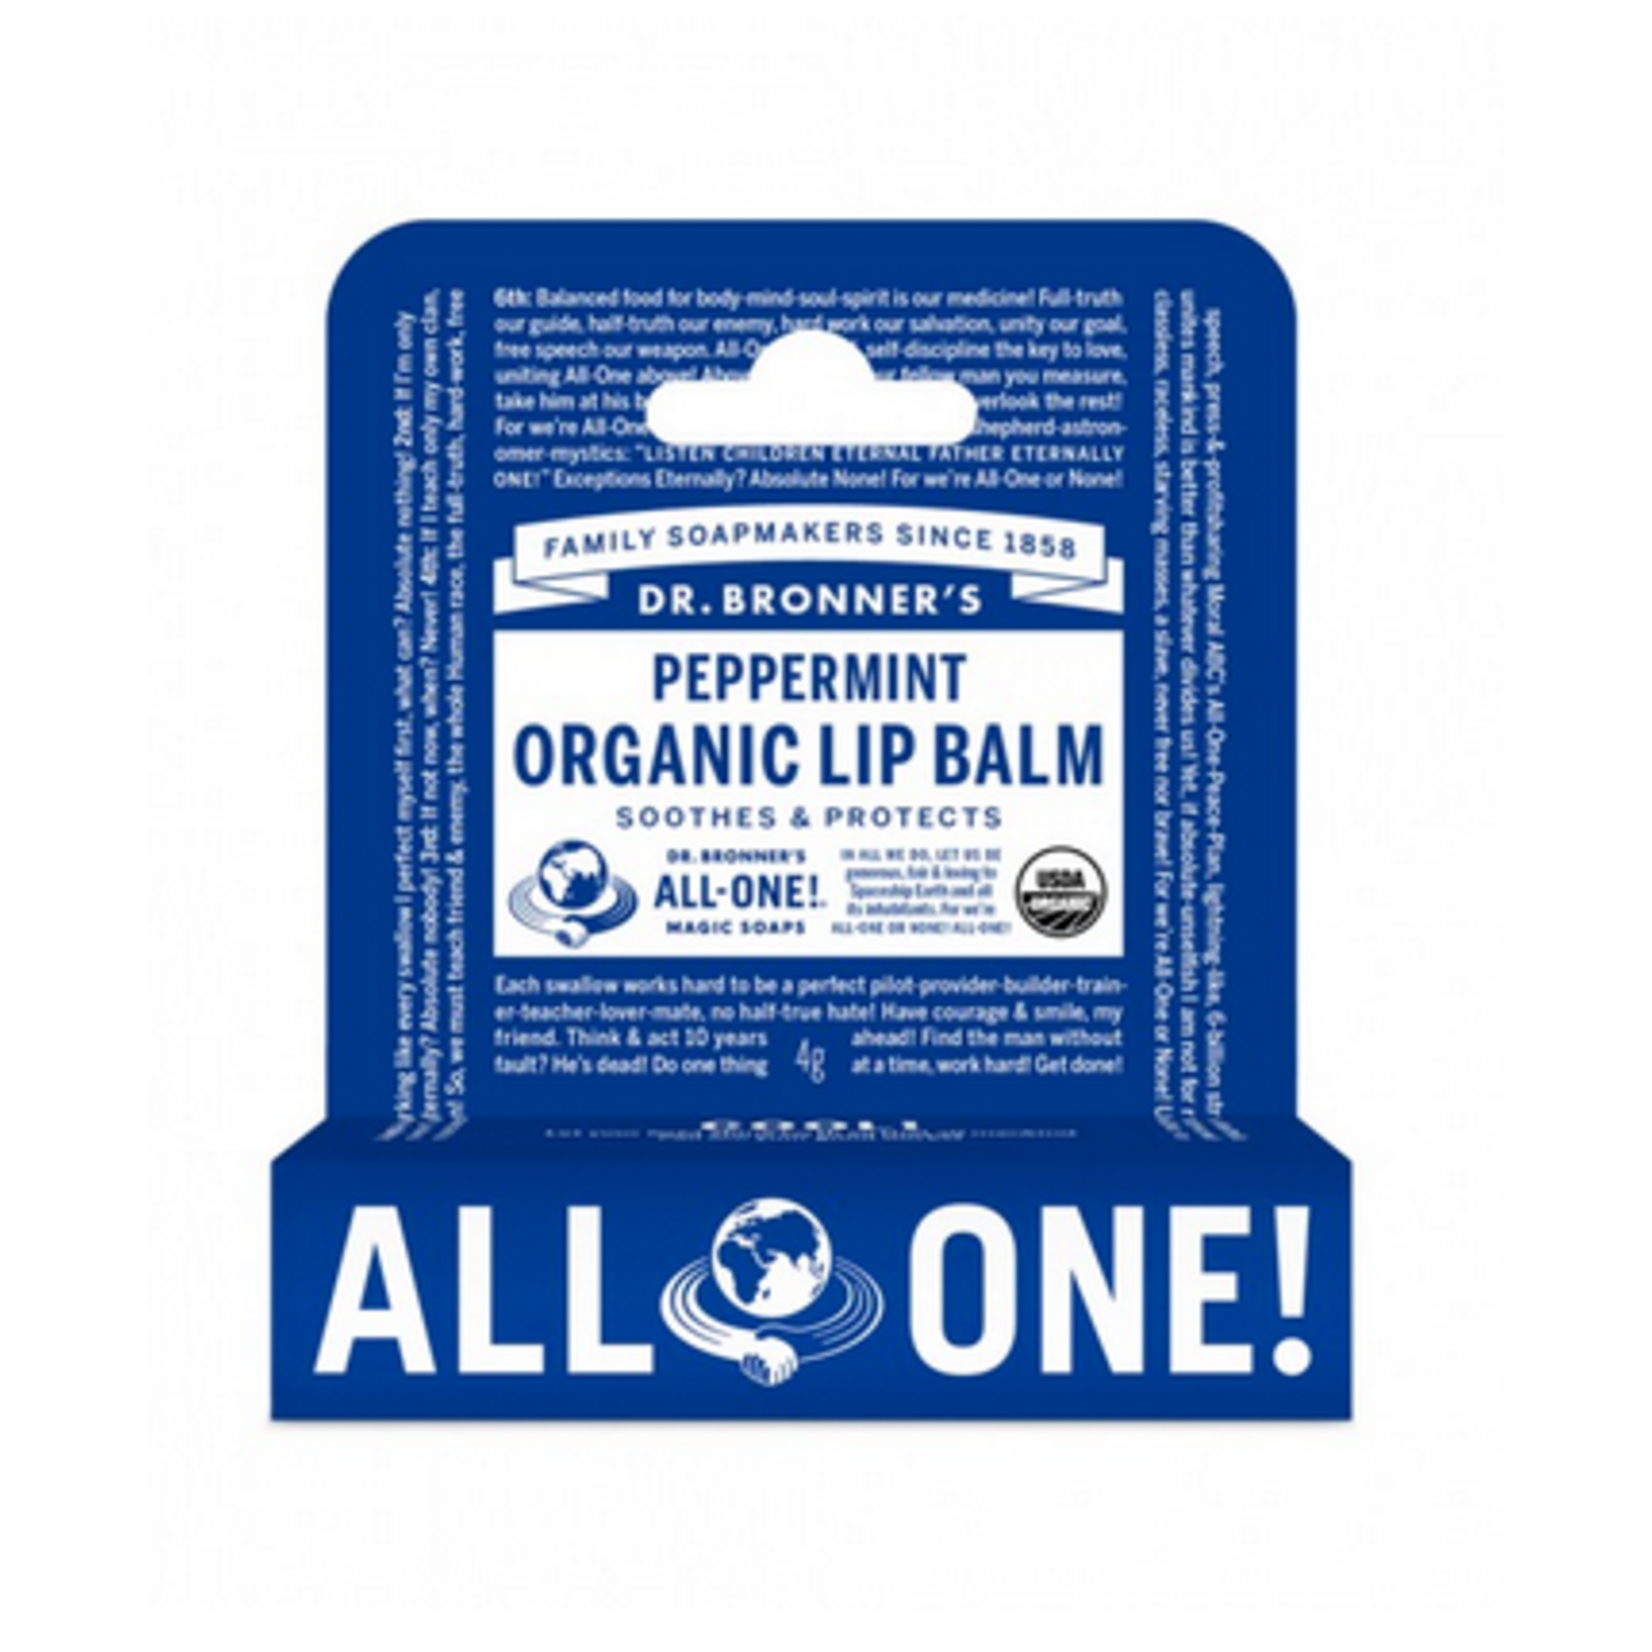 DR BRONNERS Dr Bronners hanf sell Pepperming lip balm 4g